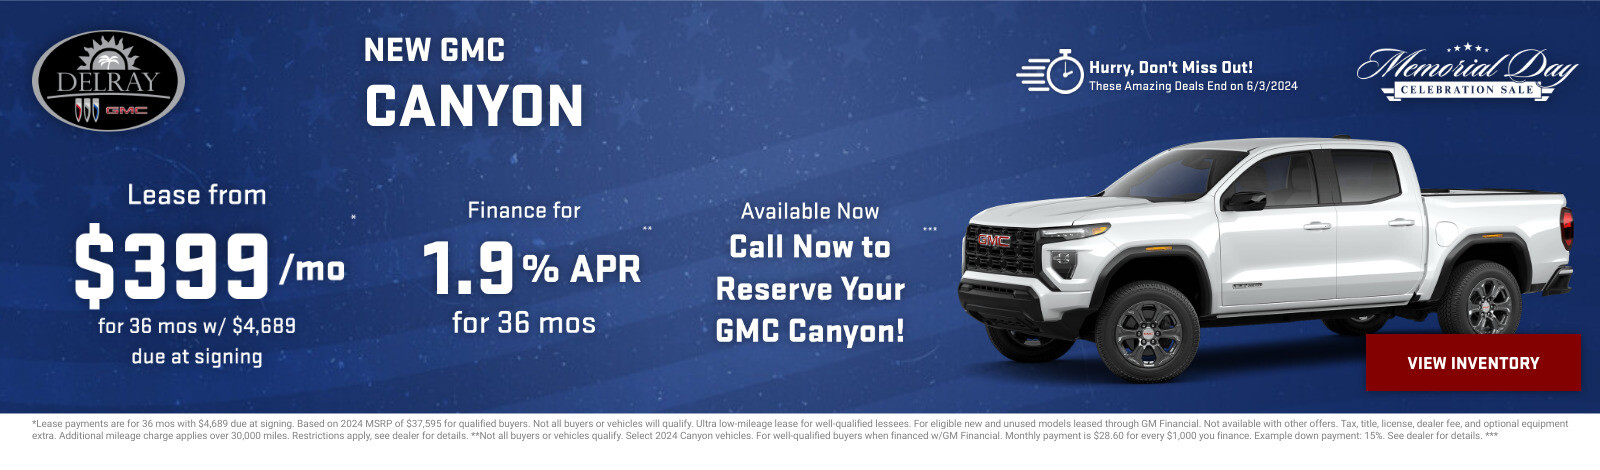 New GMC Canyon Current Deals and Offers in Delray Beach, FL